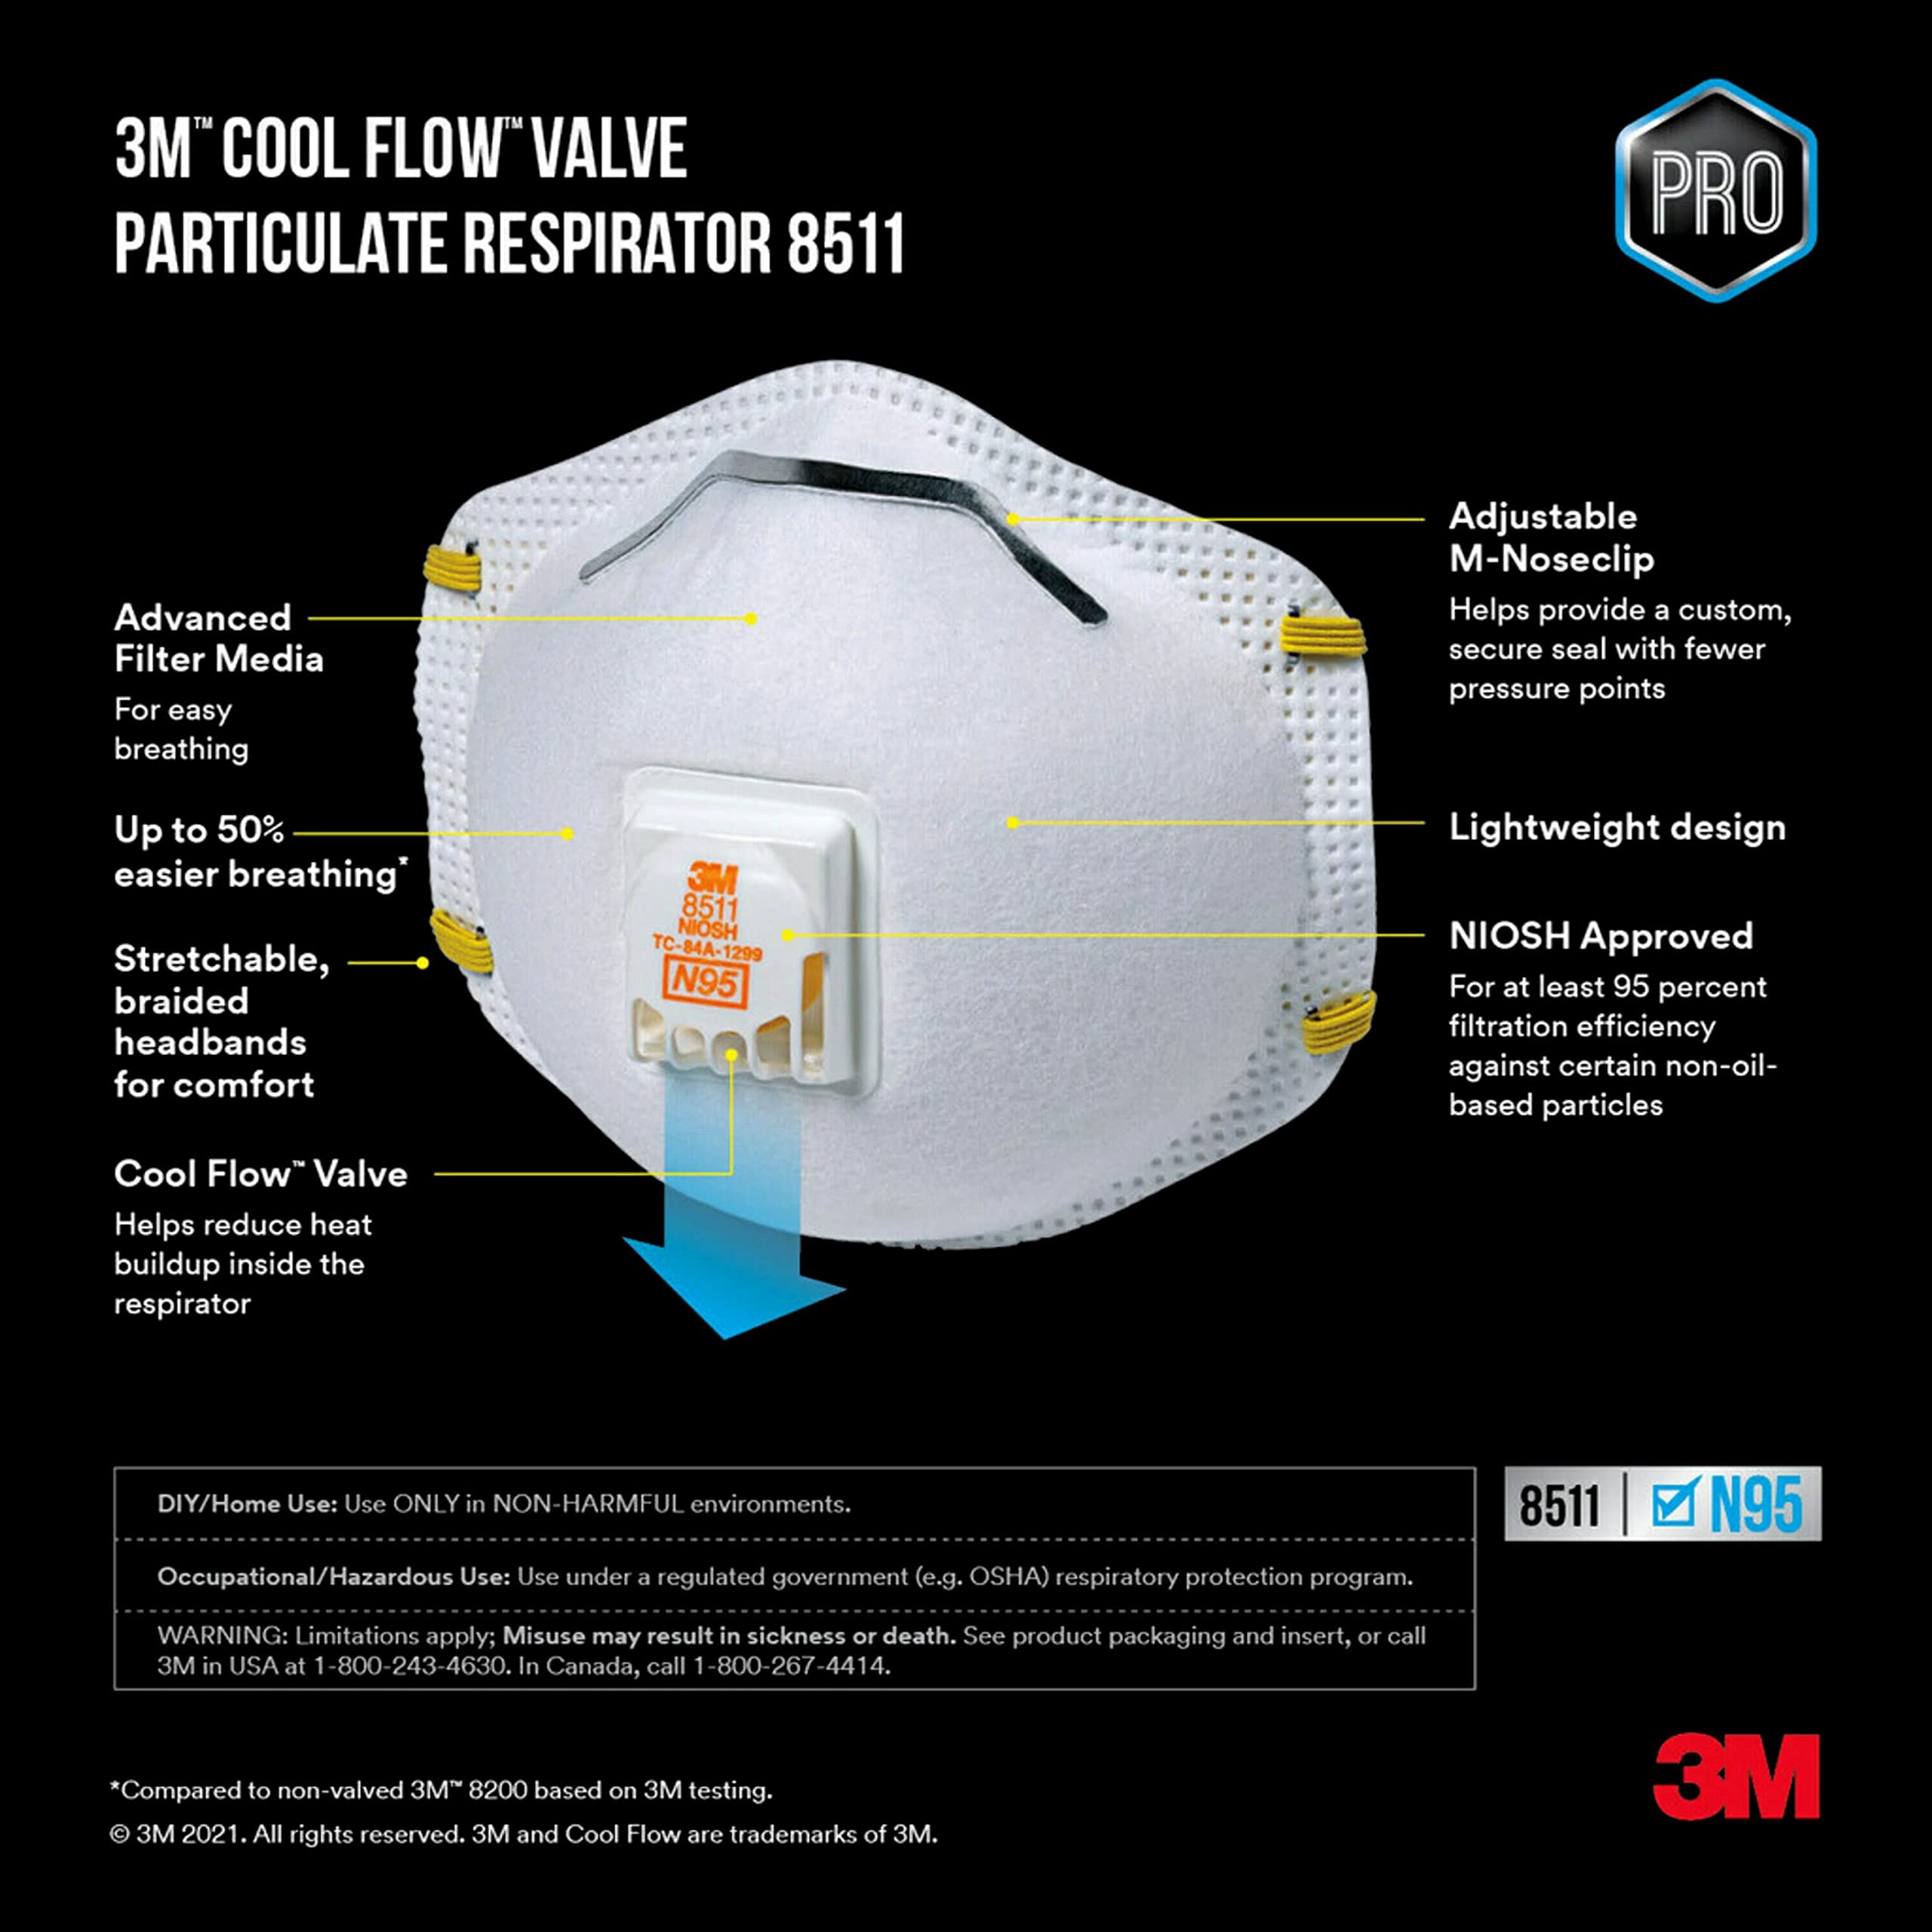 3M Respirator for Sanding, Fiberglass, Drywall, and Painting, Exhalation Valve Helps Direct Exhaled Air Downward